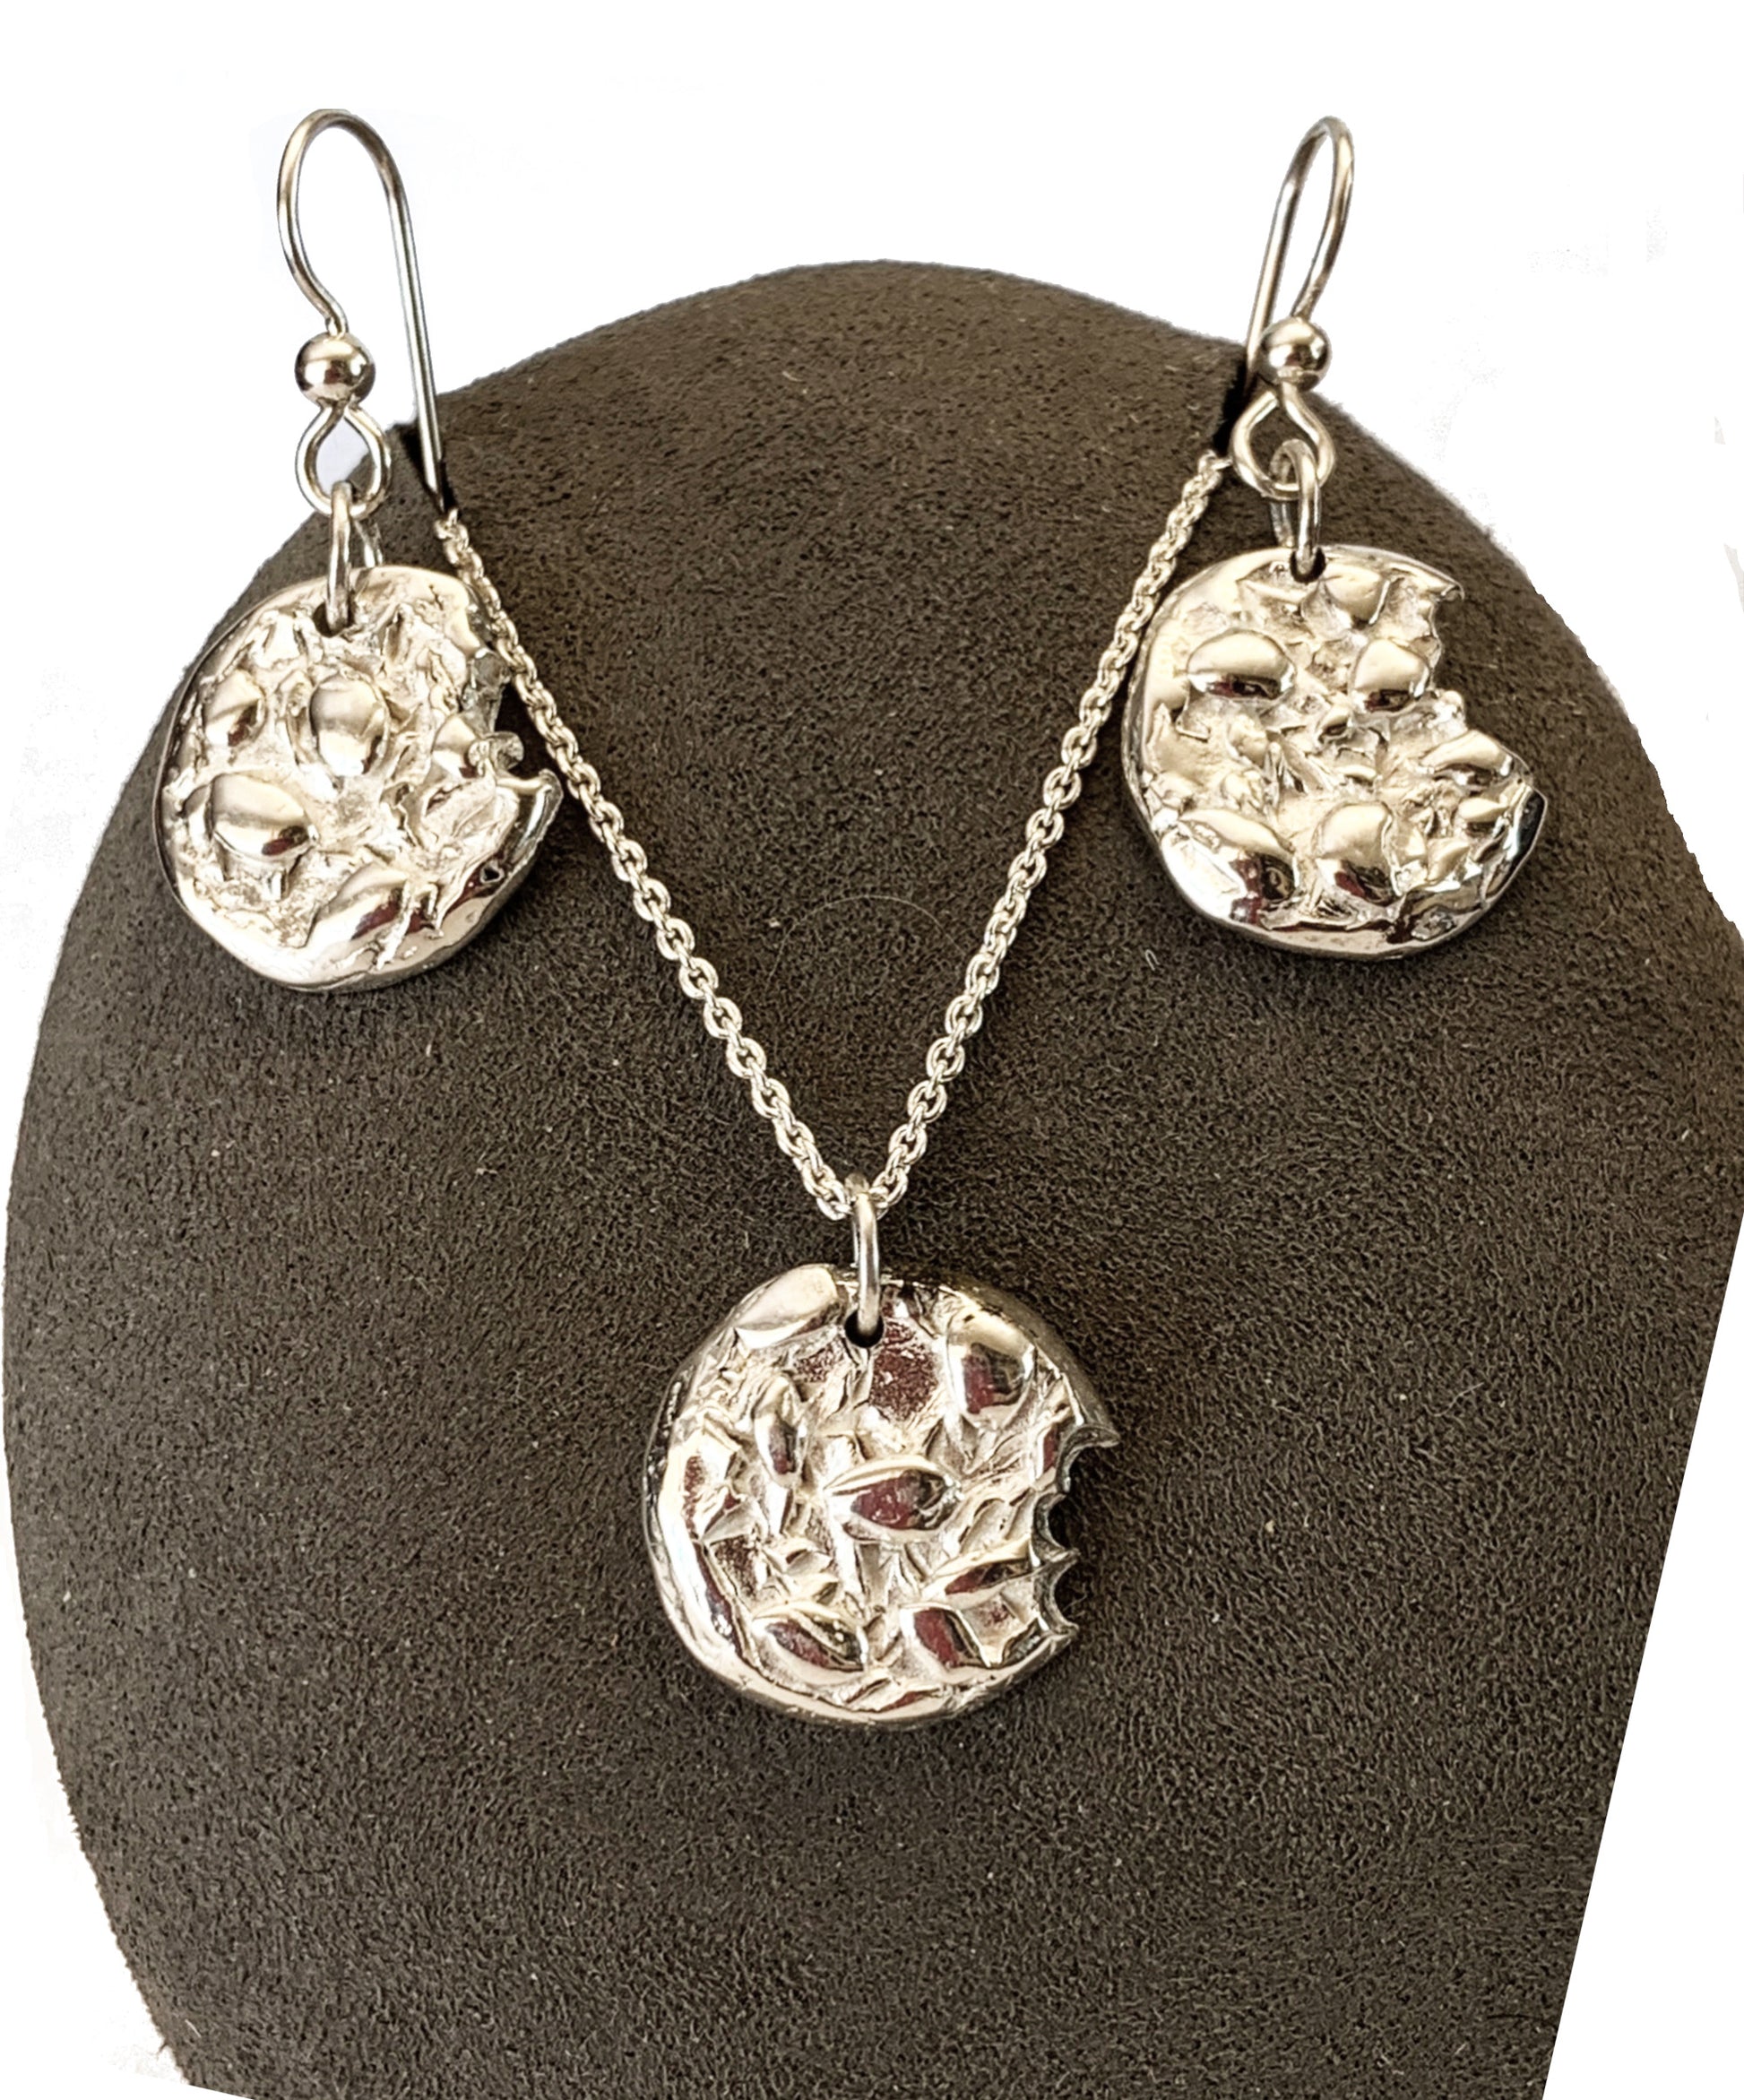 oatmeal cookie earring and necklace set